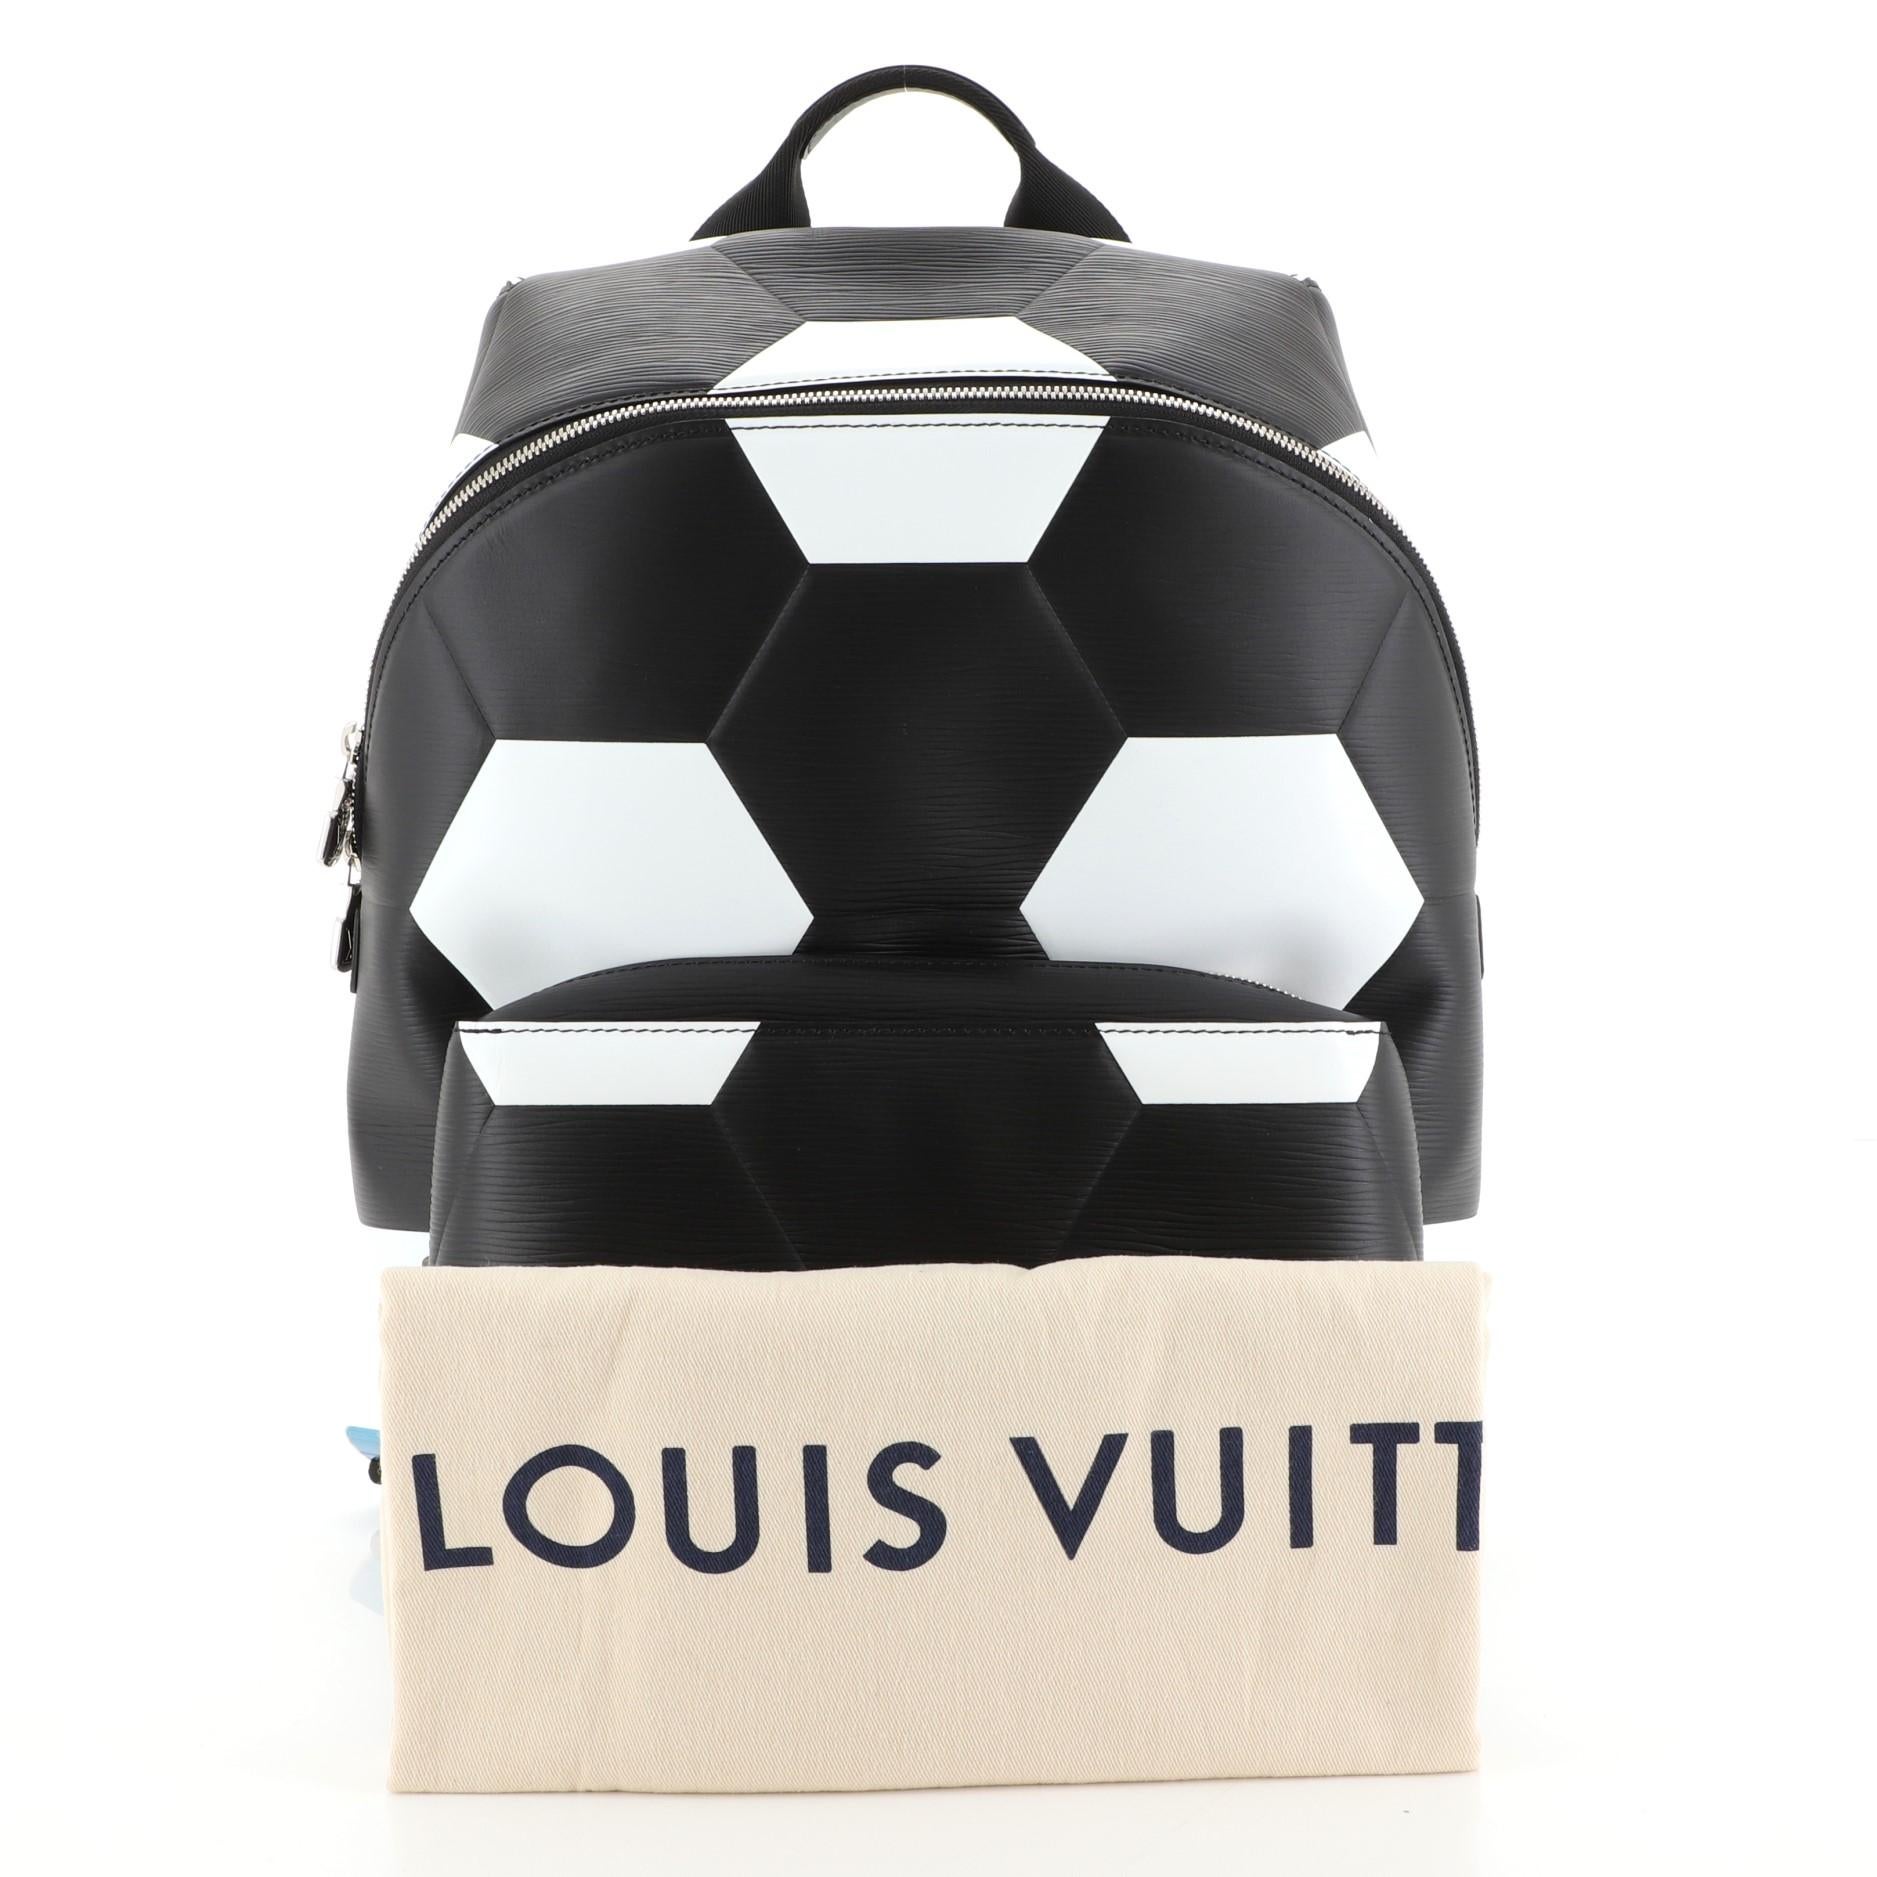 This Louis Vuitton Apollo Backpack Limited Edition FIFA World Cup Epi Leather, crafted from white, black and printed epi leather, features a top handle, adjustable back straps, hexagonal pattern of footballs, exterior front zip pocket, and